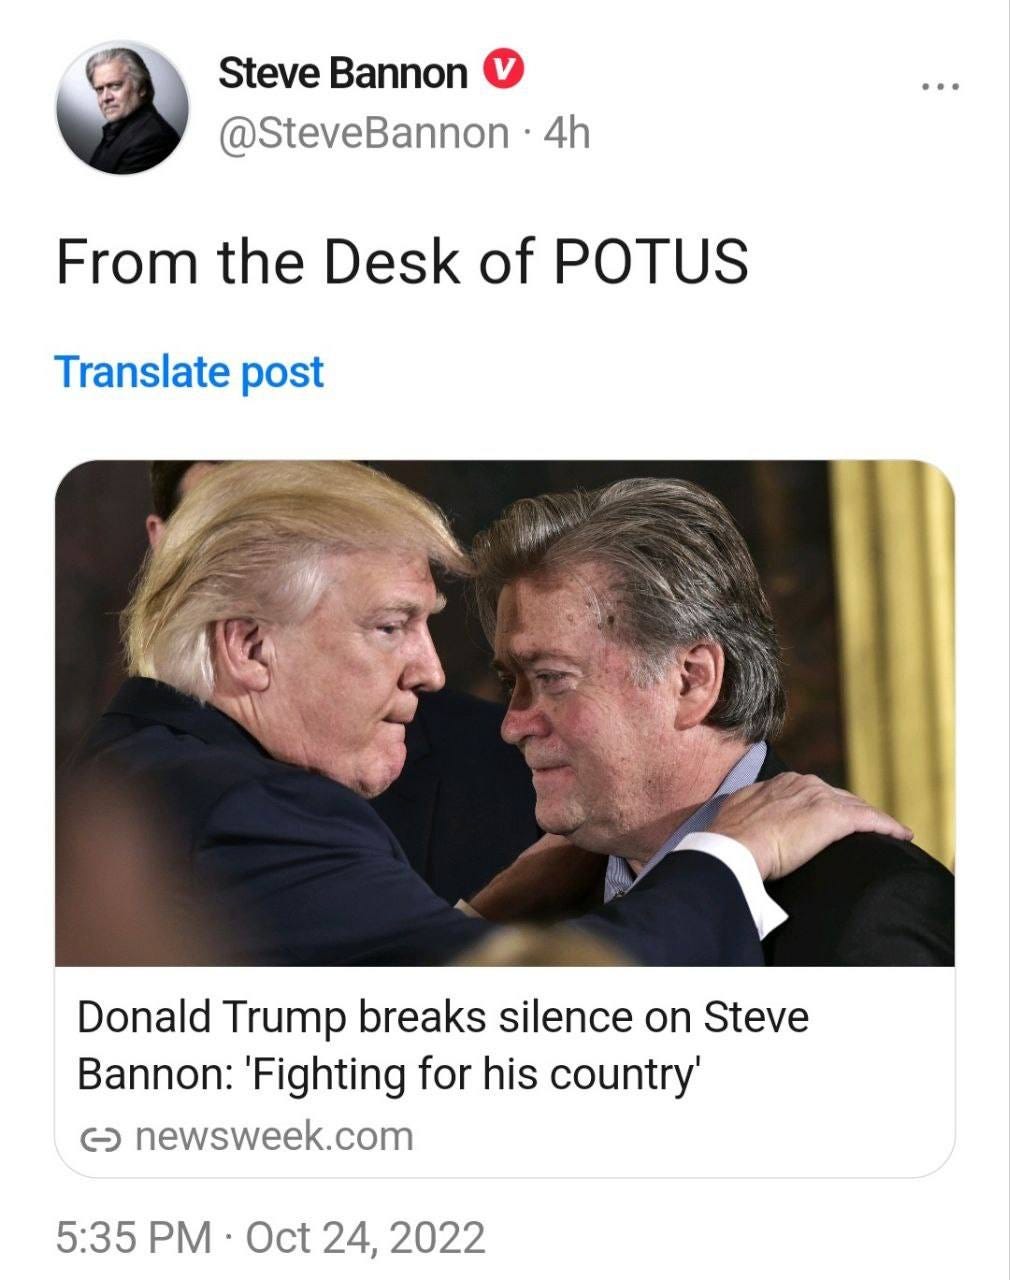 May be a Twitter screenshot of 3 people and text that says 'Steve Bannon @SteveBannon 4h From the Desk of POTUS Translate post Donald Trump breaks silence on Steve Bannon: 'Fighting for his country' ૯ newsweek.com 5:35 PM Oct 24, 2022'